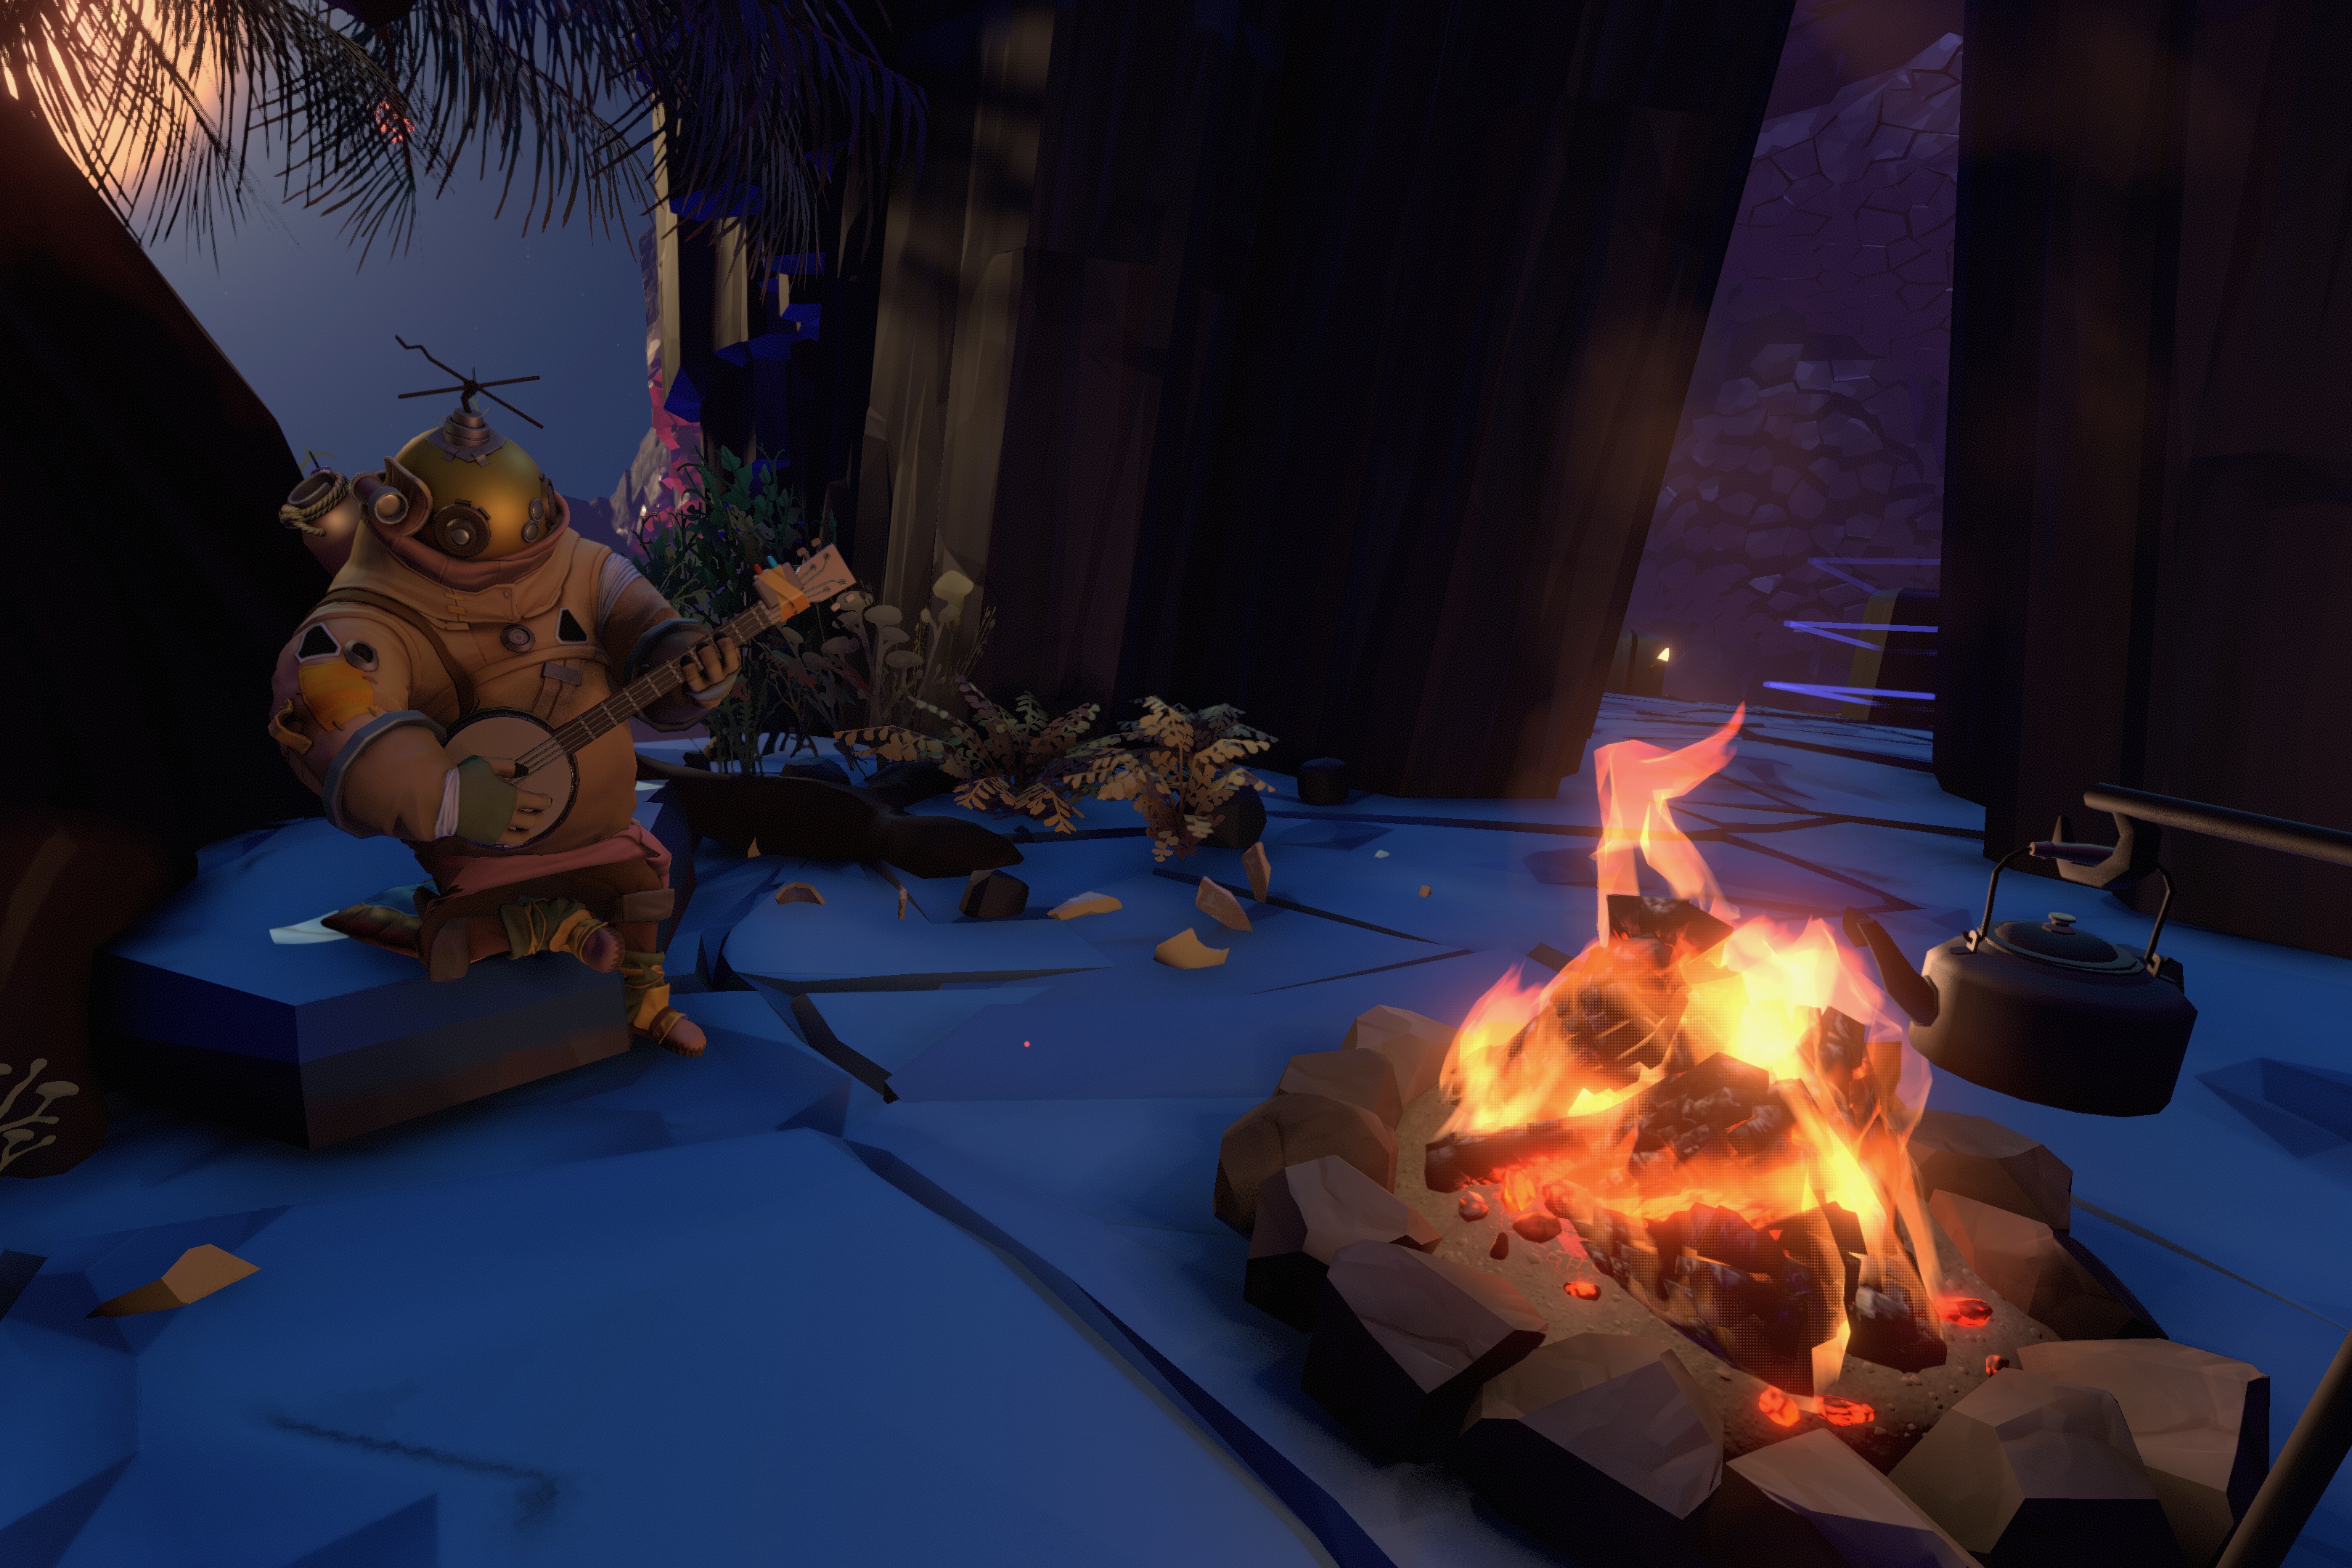 Outer Wilds  Composing Campfire SF with Andrew Prahlow